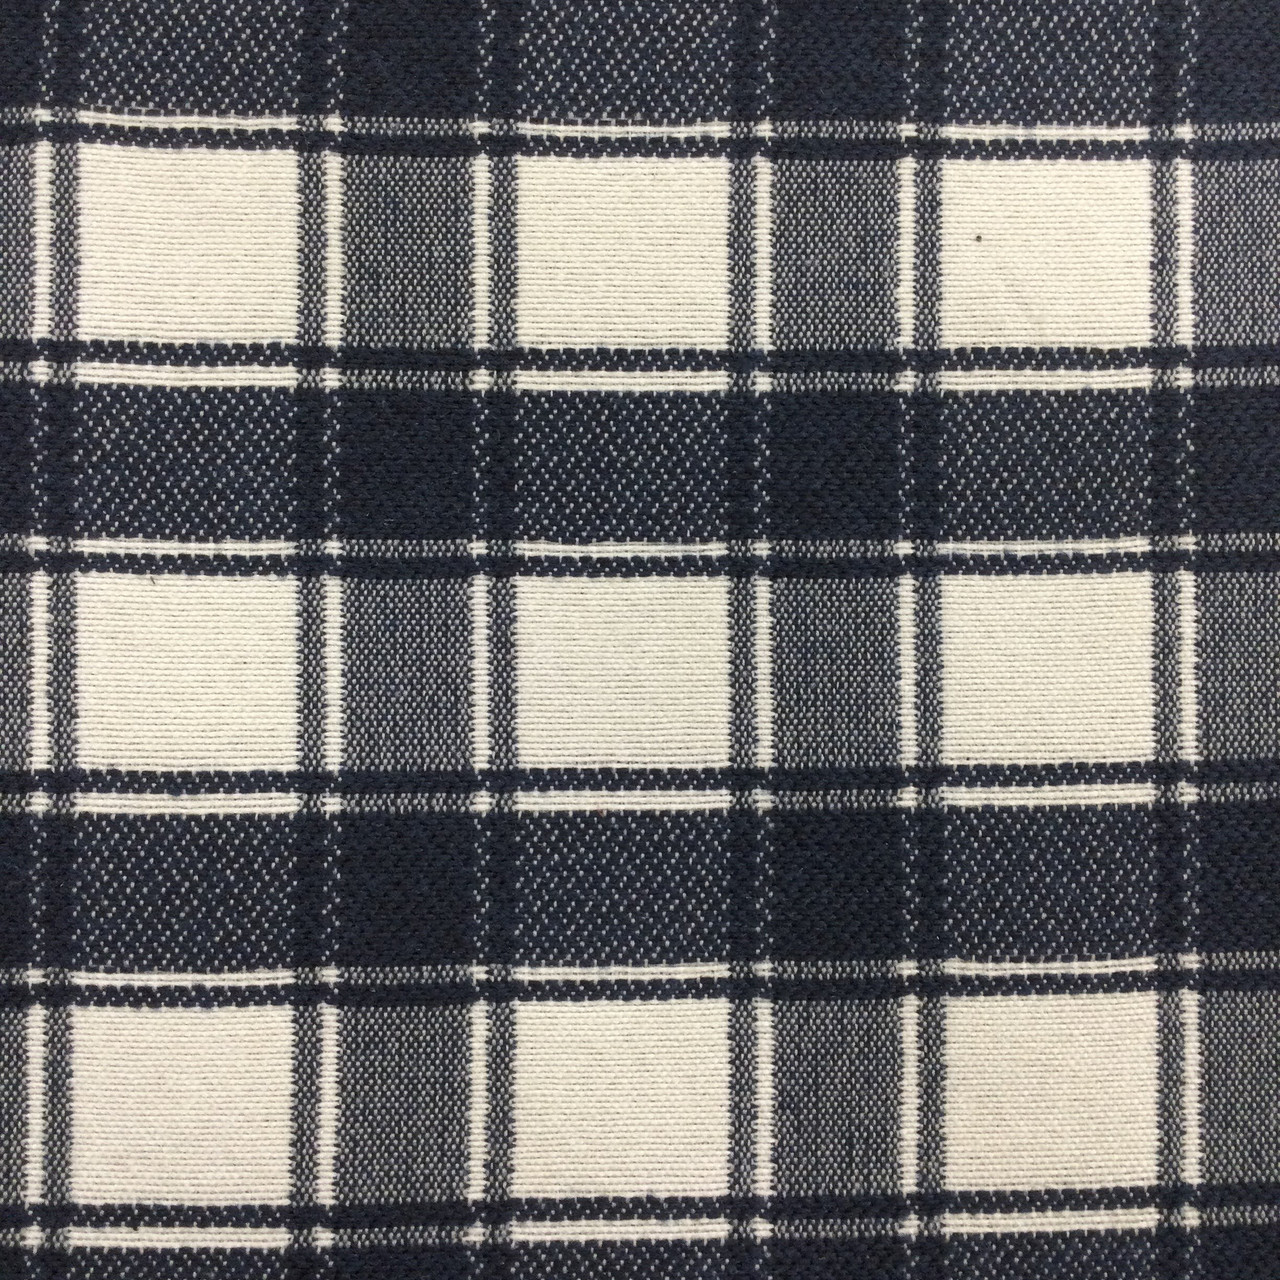 Navy Blue and White Plaid | Woven Wool Fabric | 12oz | 80/20 | 54 Wide |  By the Yard